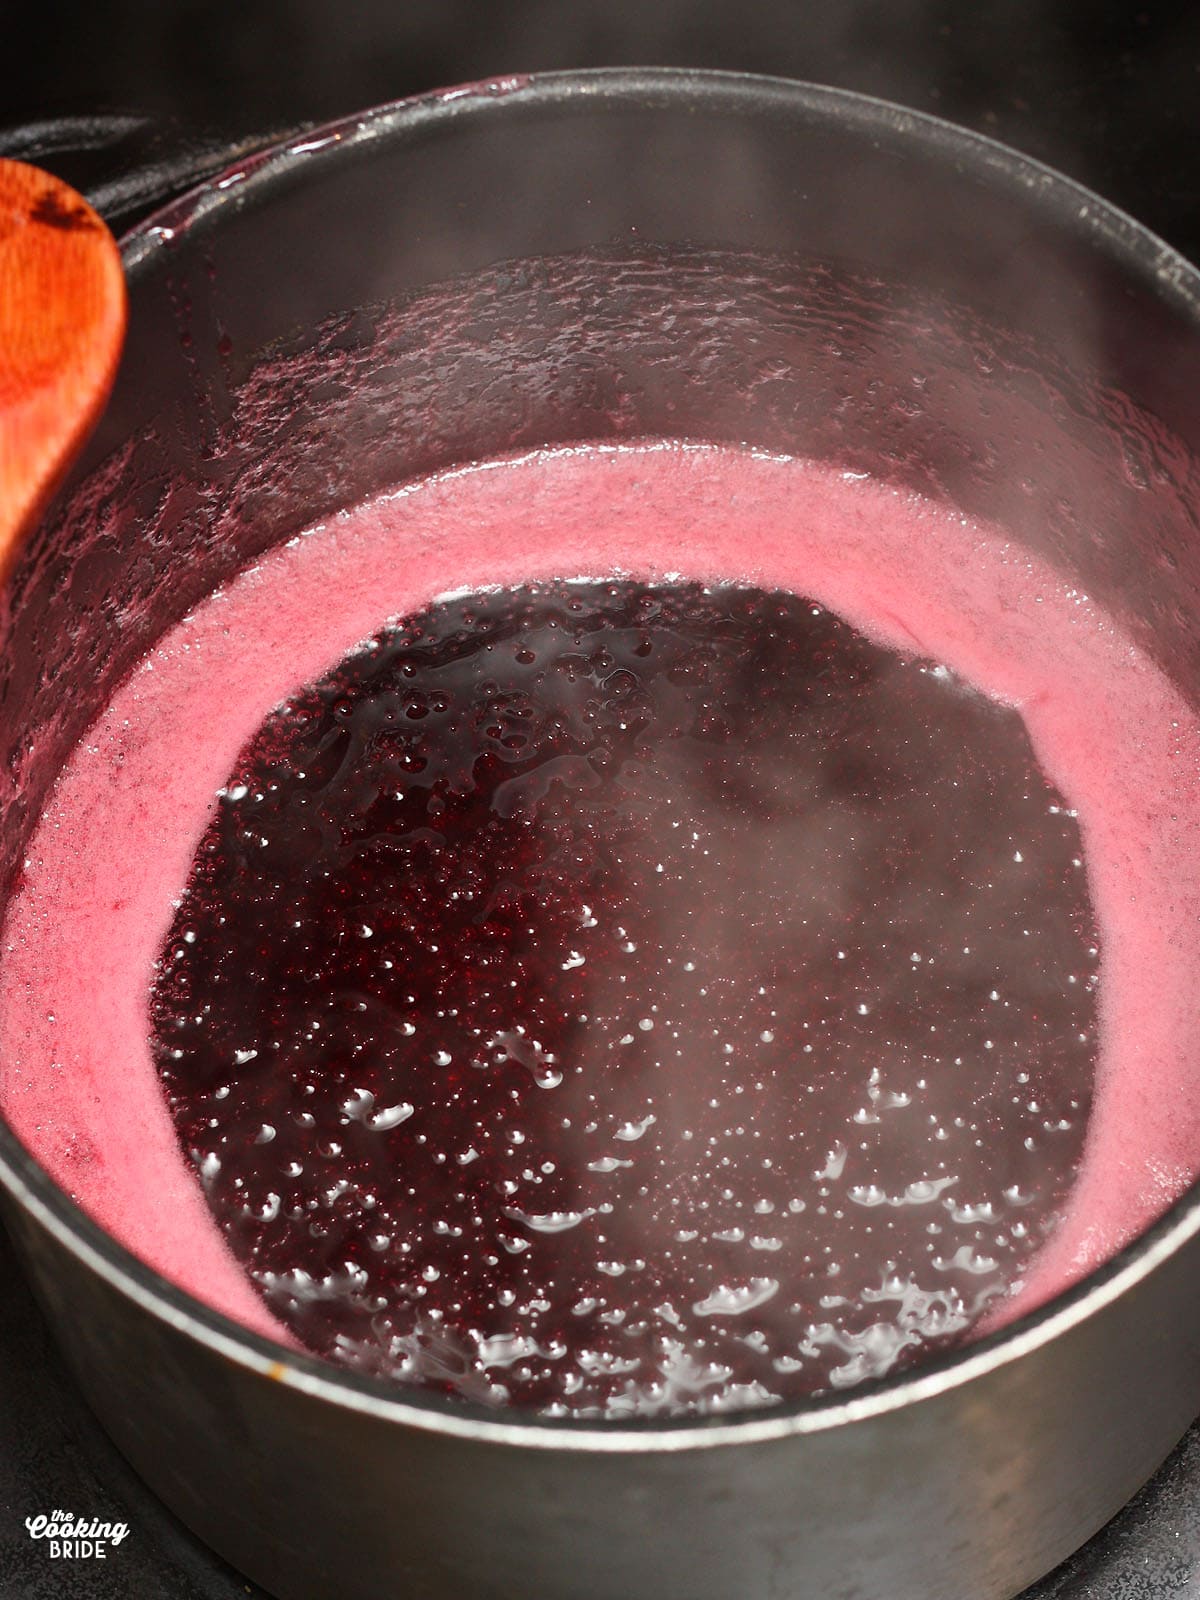 bringing the plum jelly to a boil